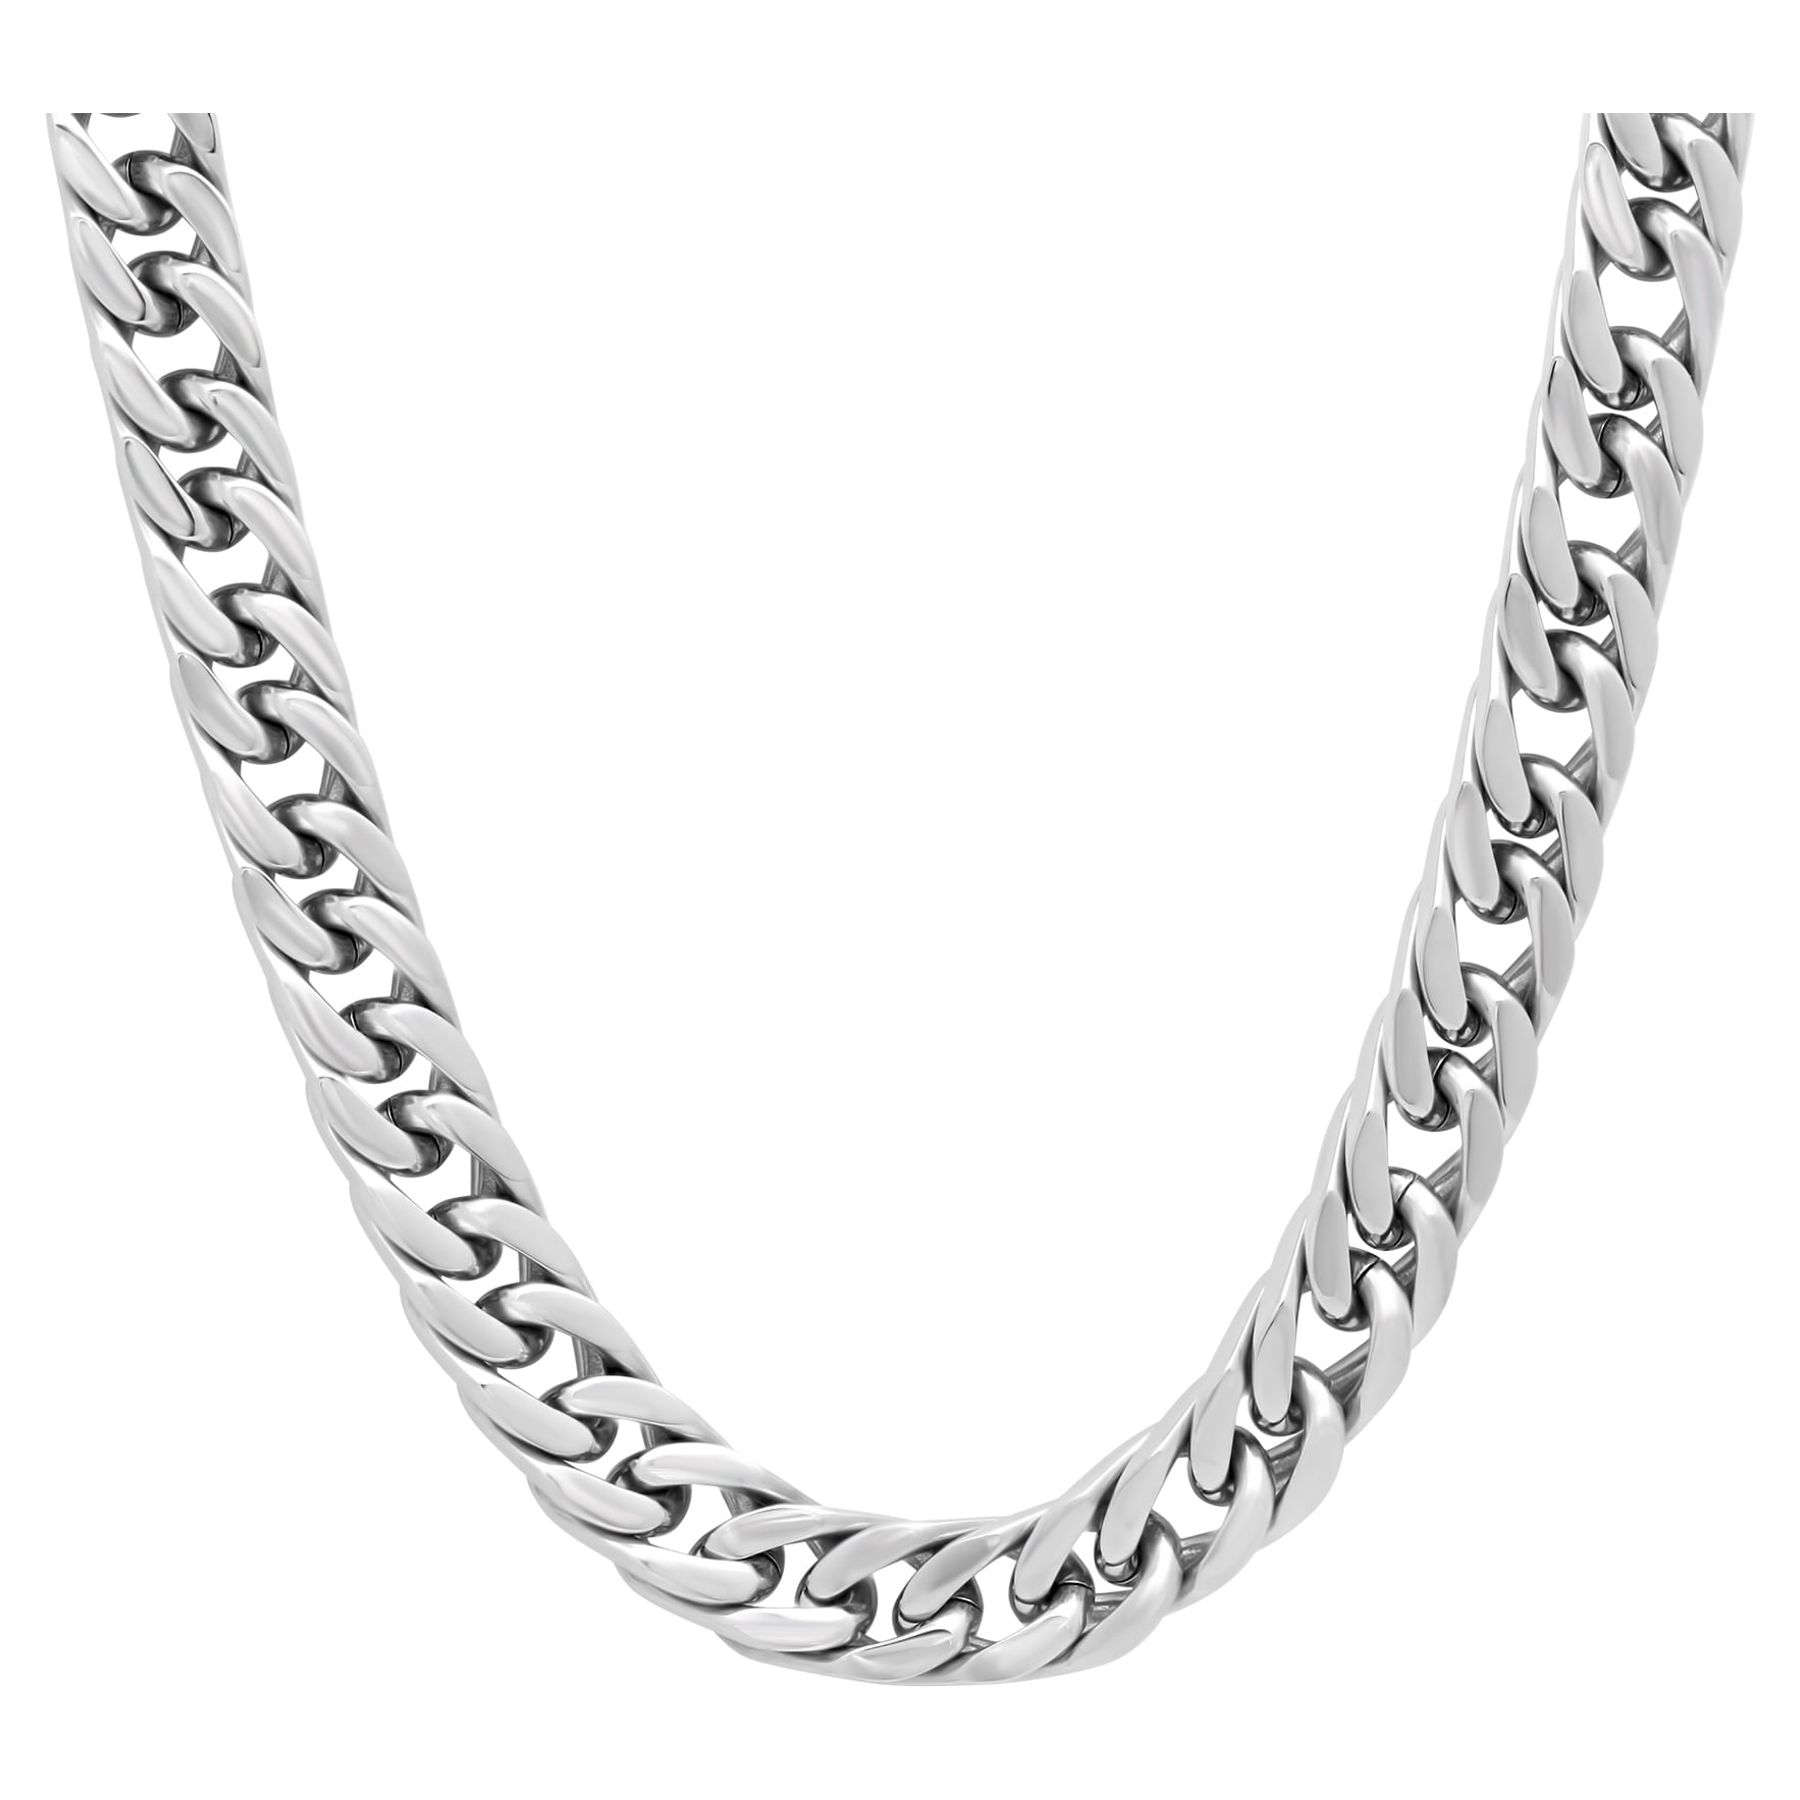 Men's Stainless Steel 24 Curb Link Chain Necklace